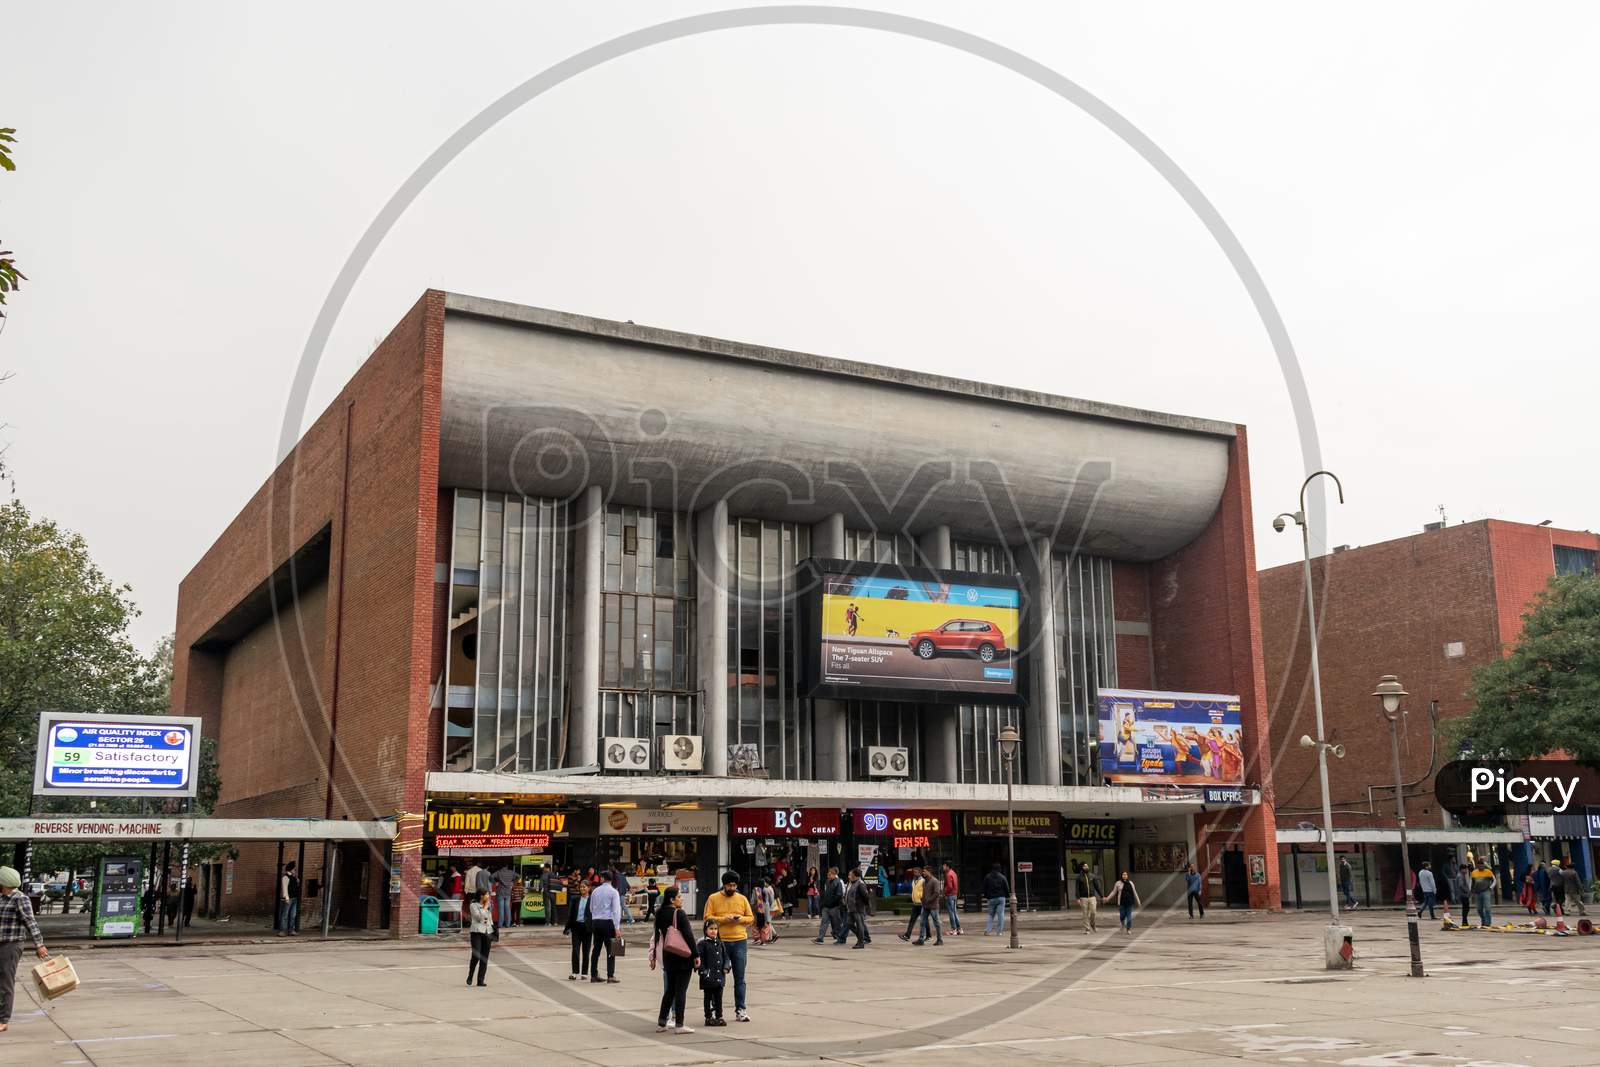 A movie theater at city center or sector 17 market chandigarh